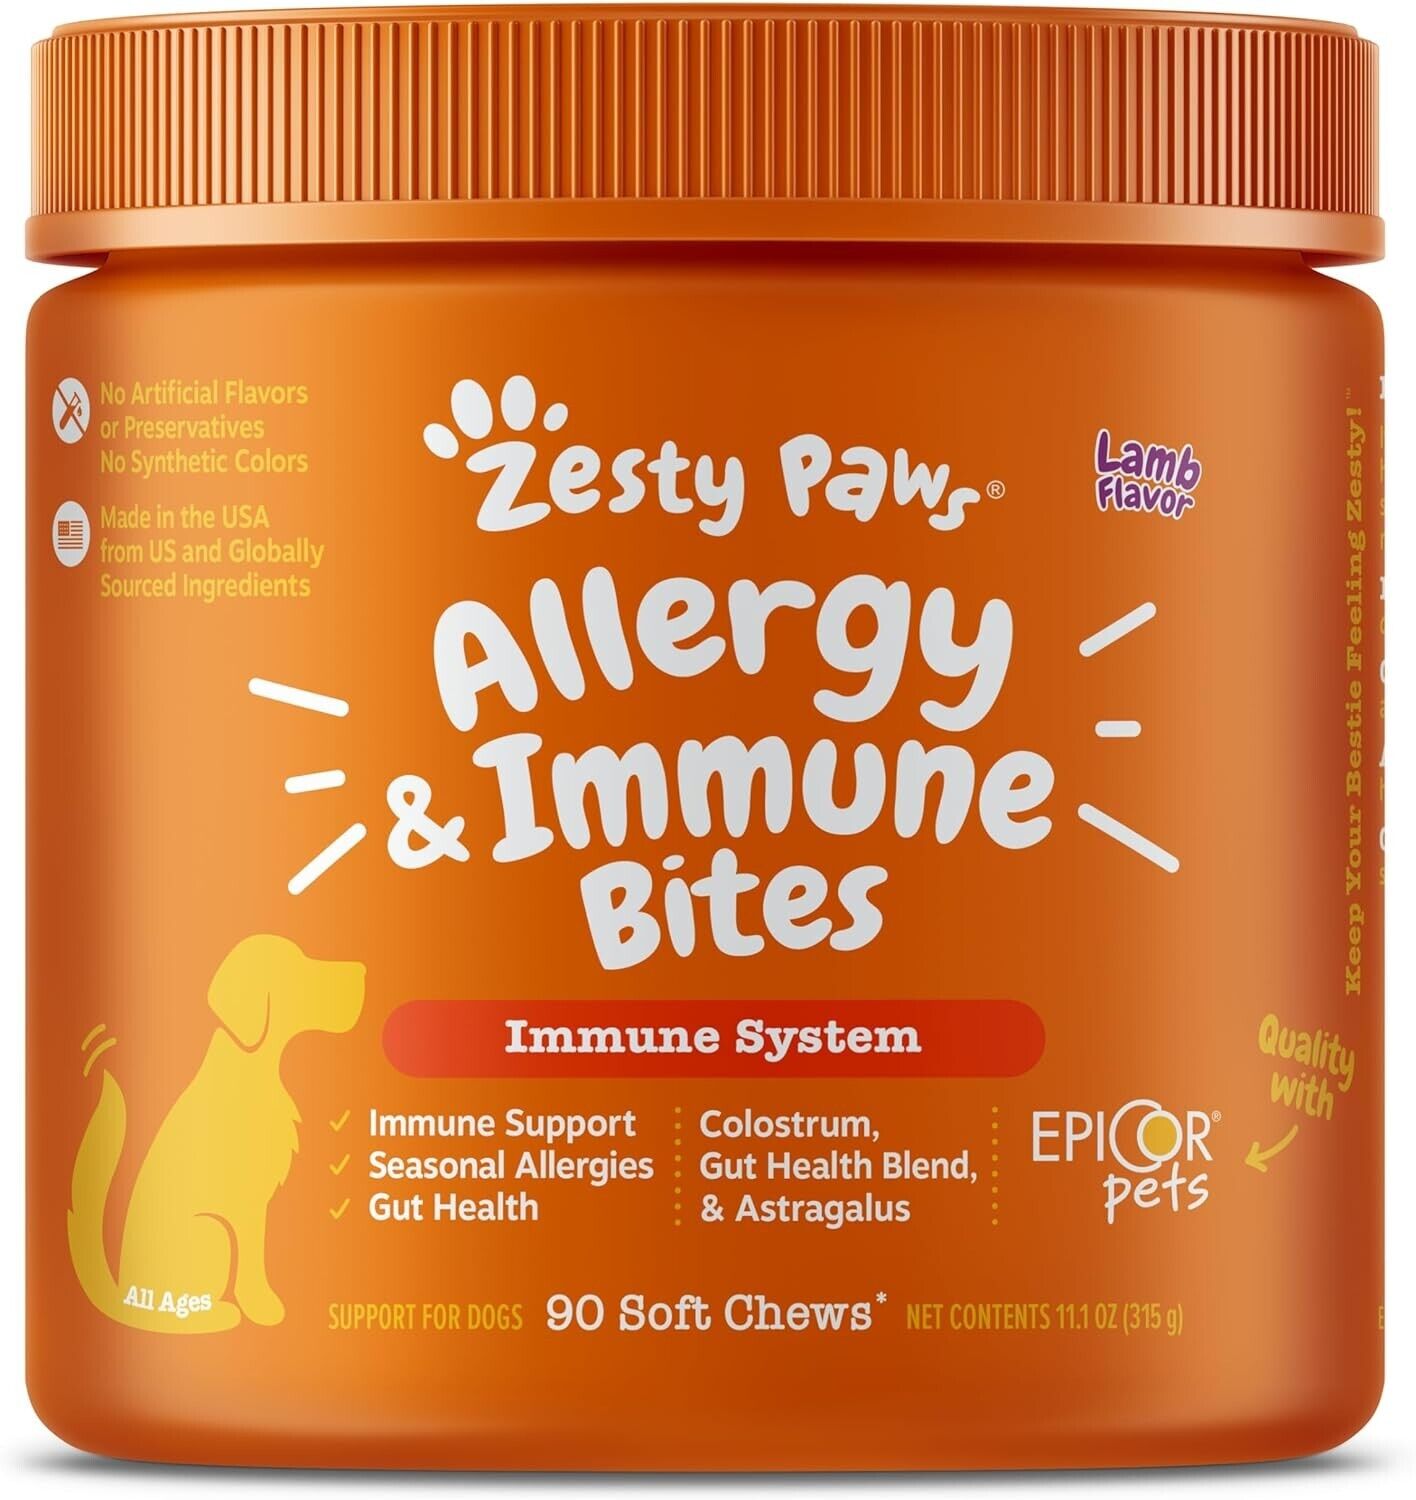 Zesty Paws Allergy Immune Bites Supplement for Dogs - All Ages (90 Soft Chews)